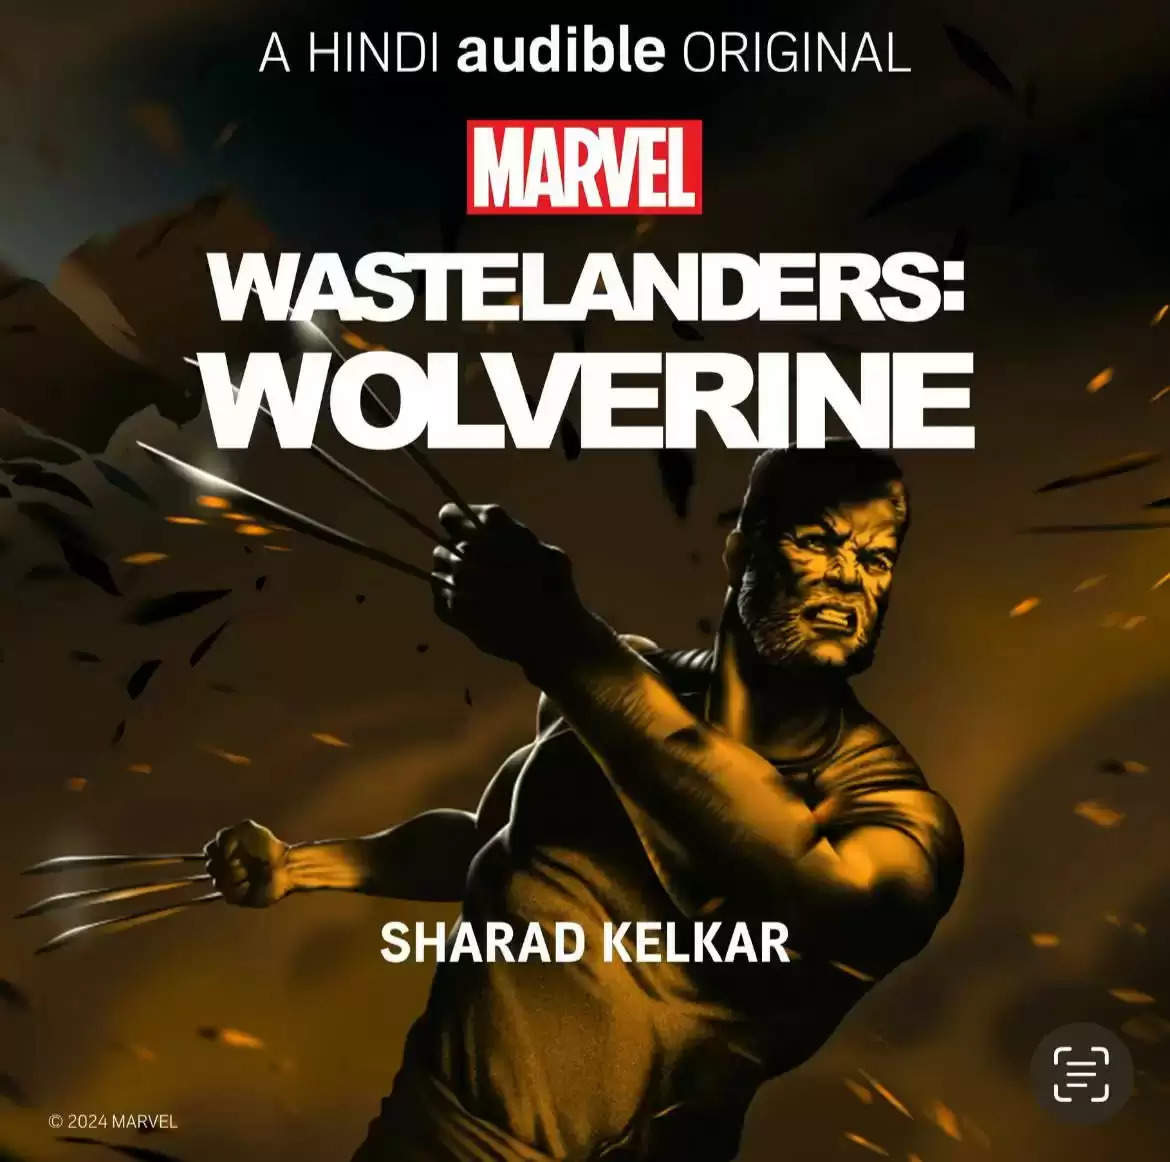 MARVEL’S WASTELANDERS: WOLVERINE, A HINDI AUDIBLE ORIGINAL PODCAST SERIES IS NOW AVAILABLE!